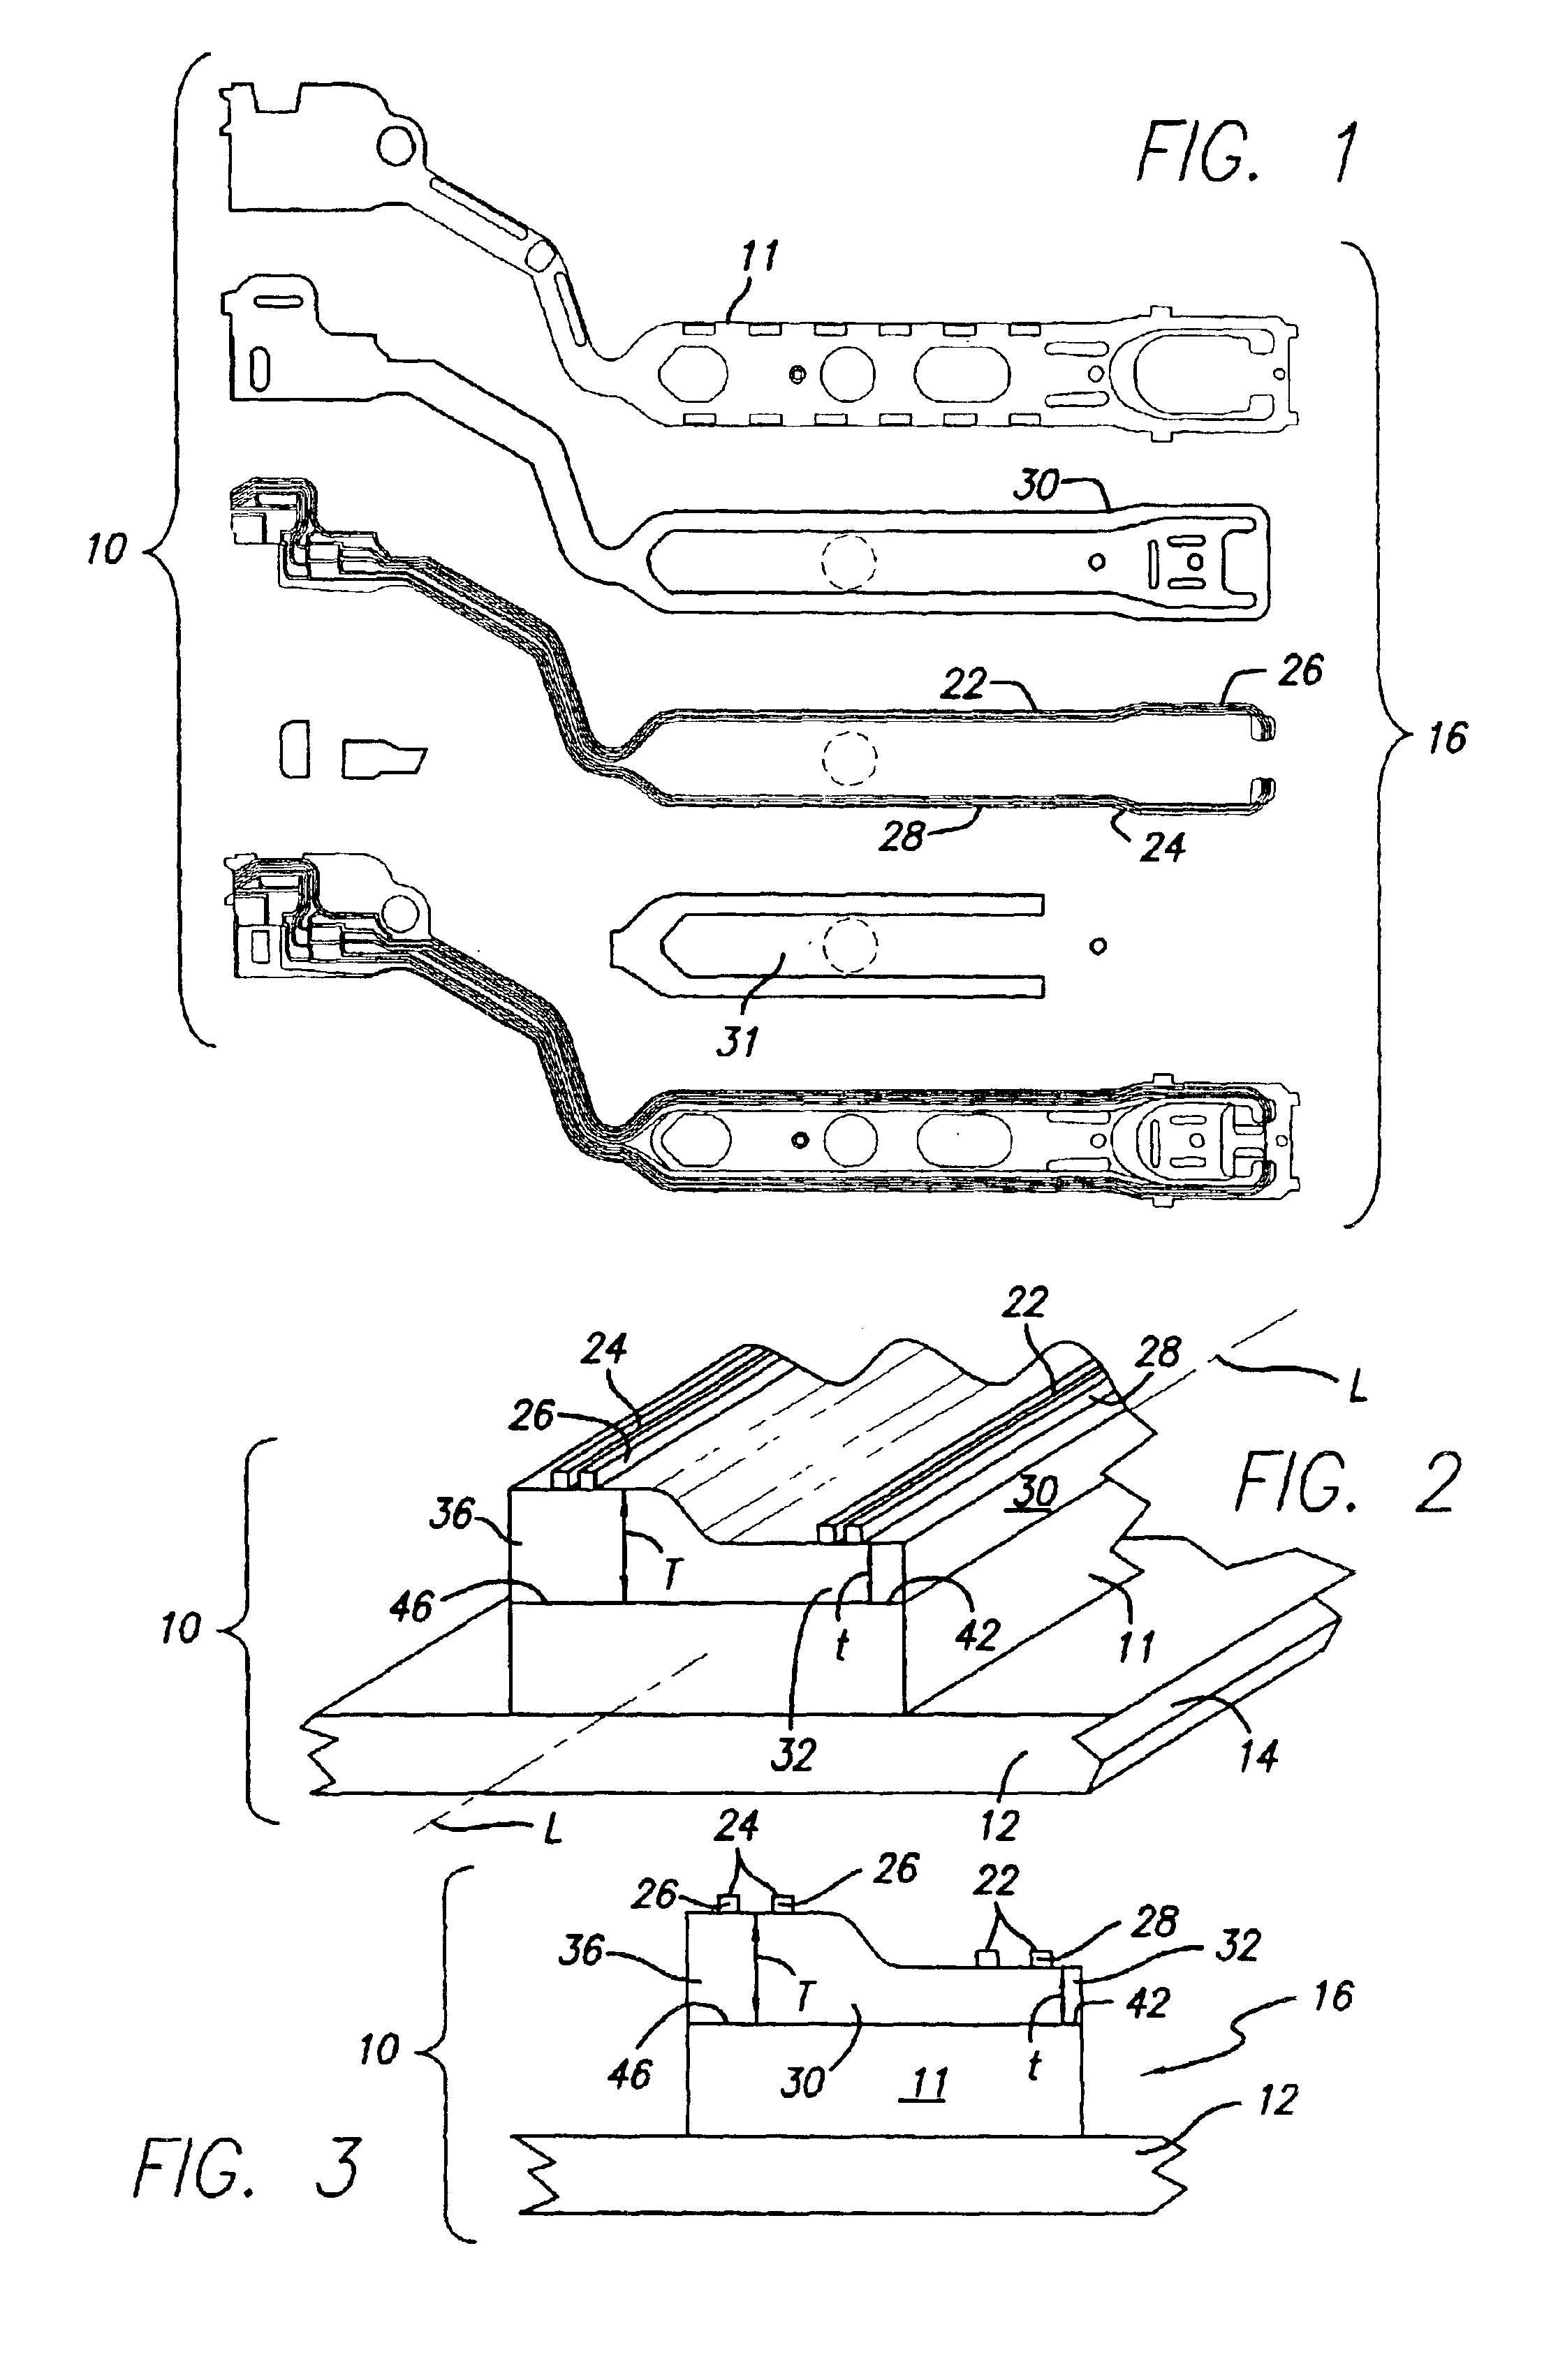 Trace flexure suspension with differential insulator and trace structures for locally tailoring impedance